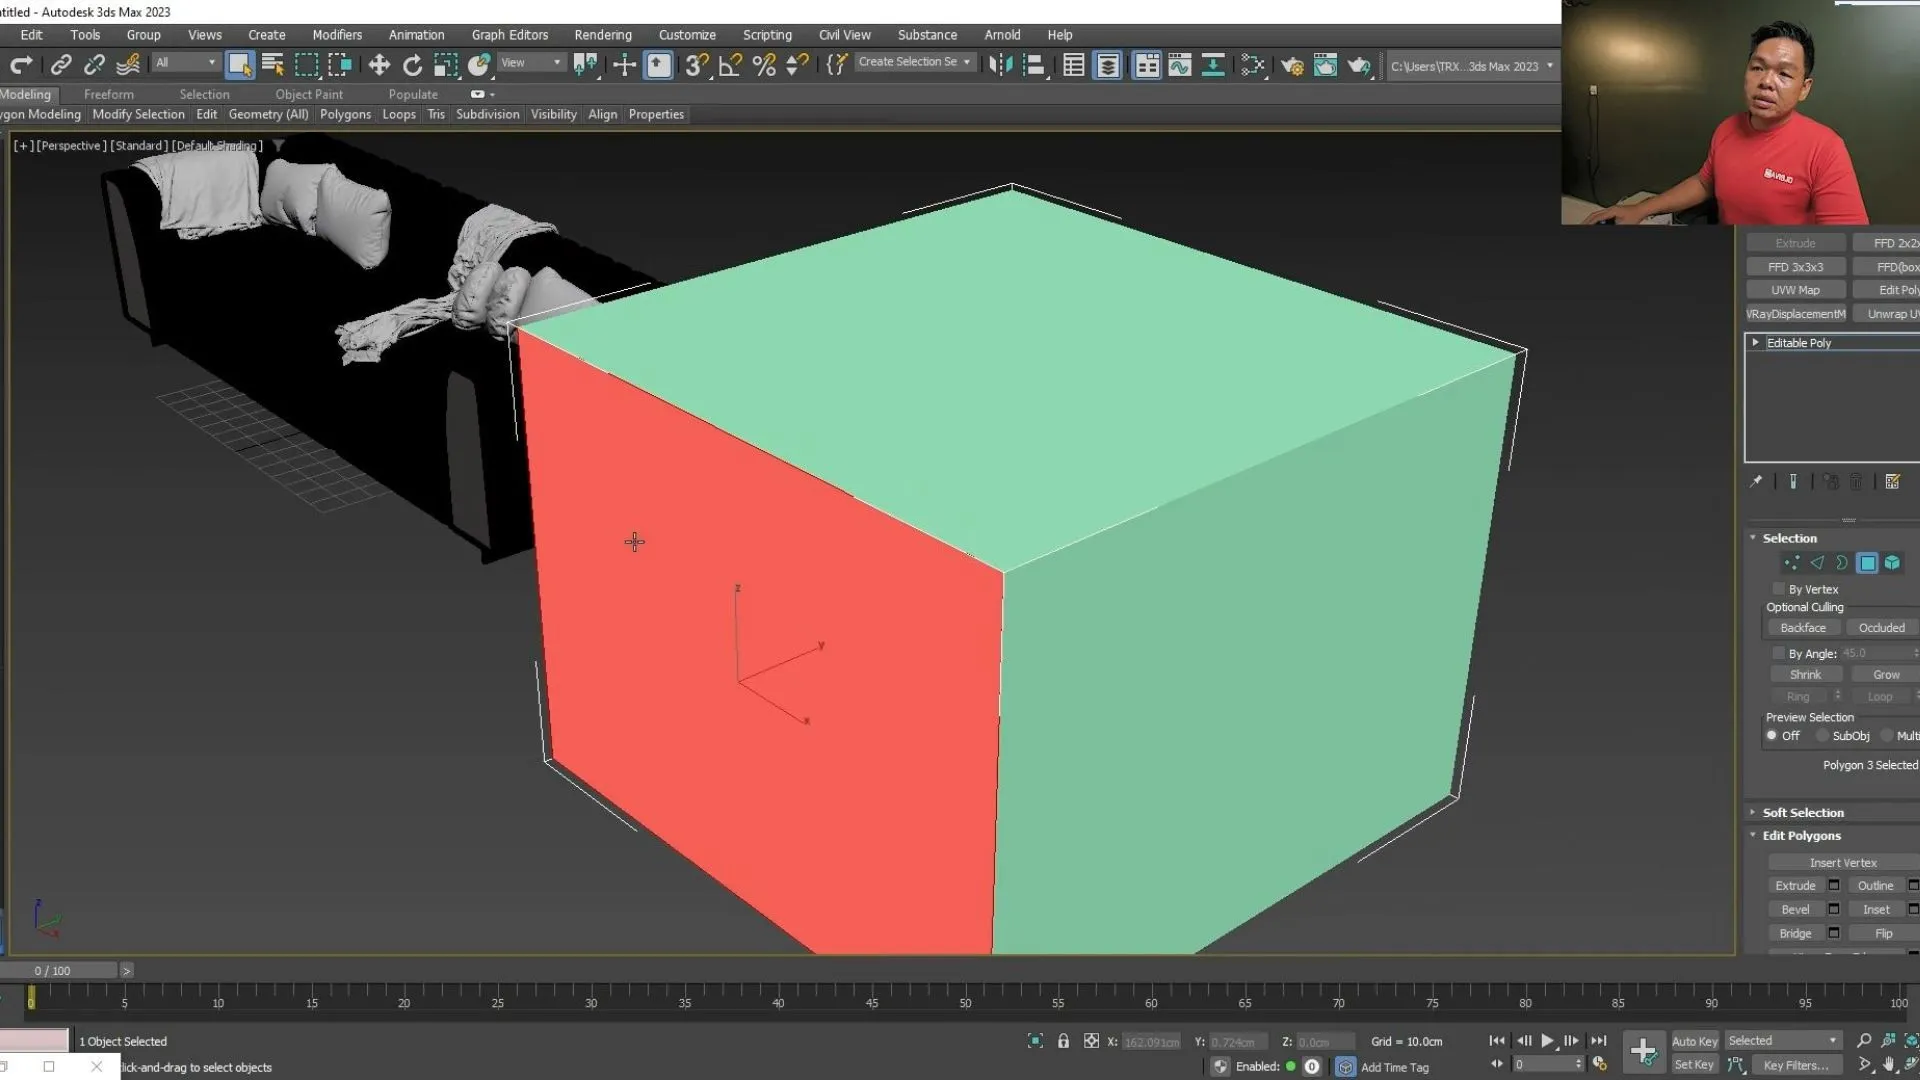 Getting started with 3dsmax